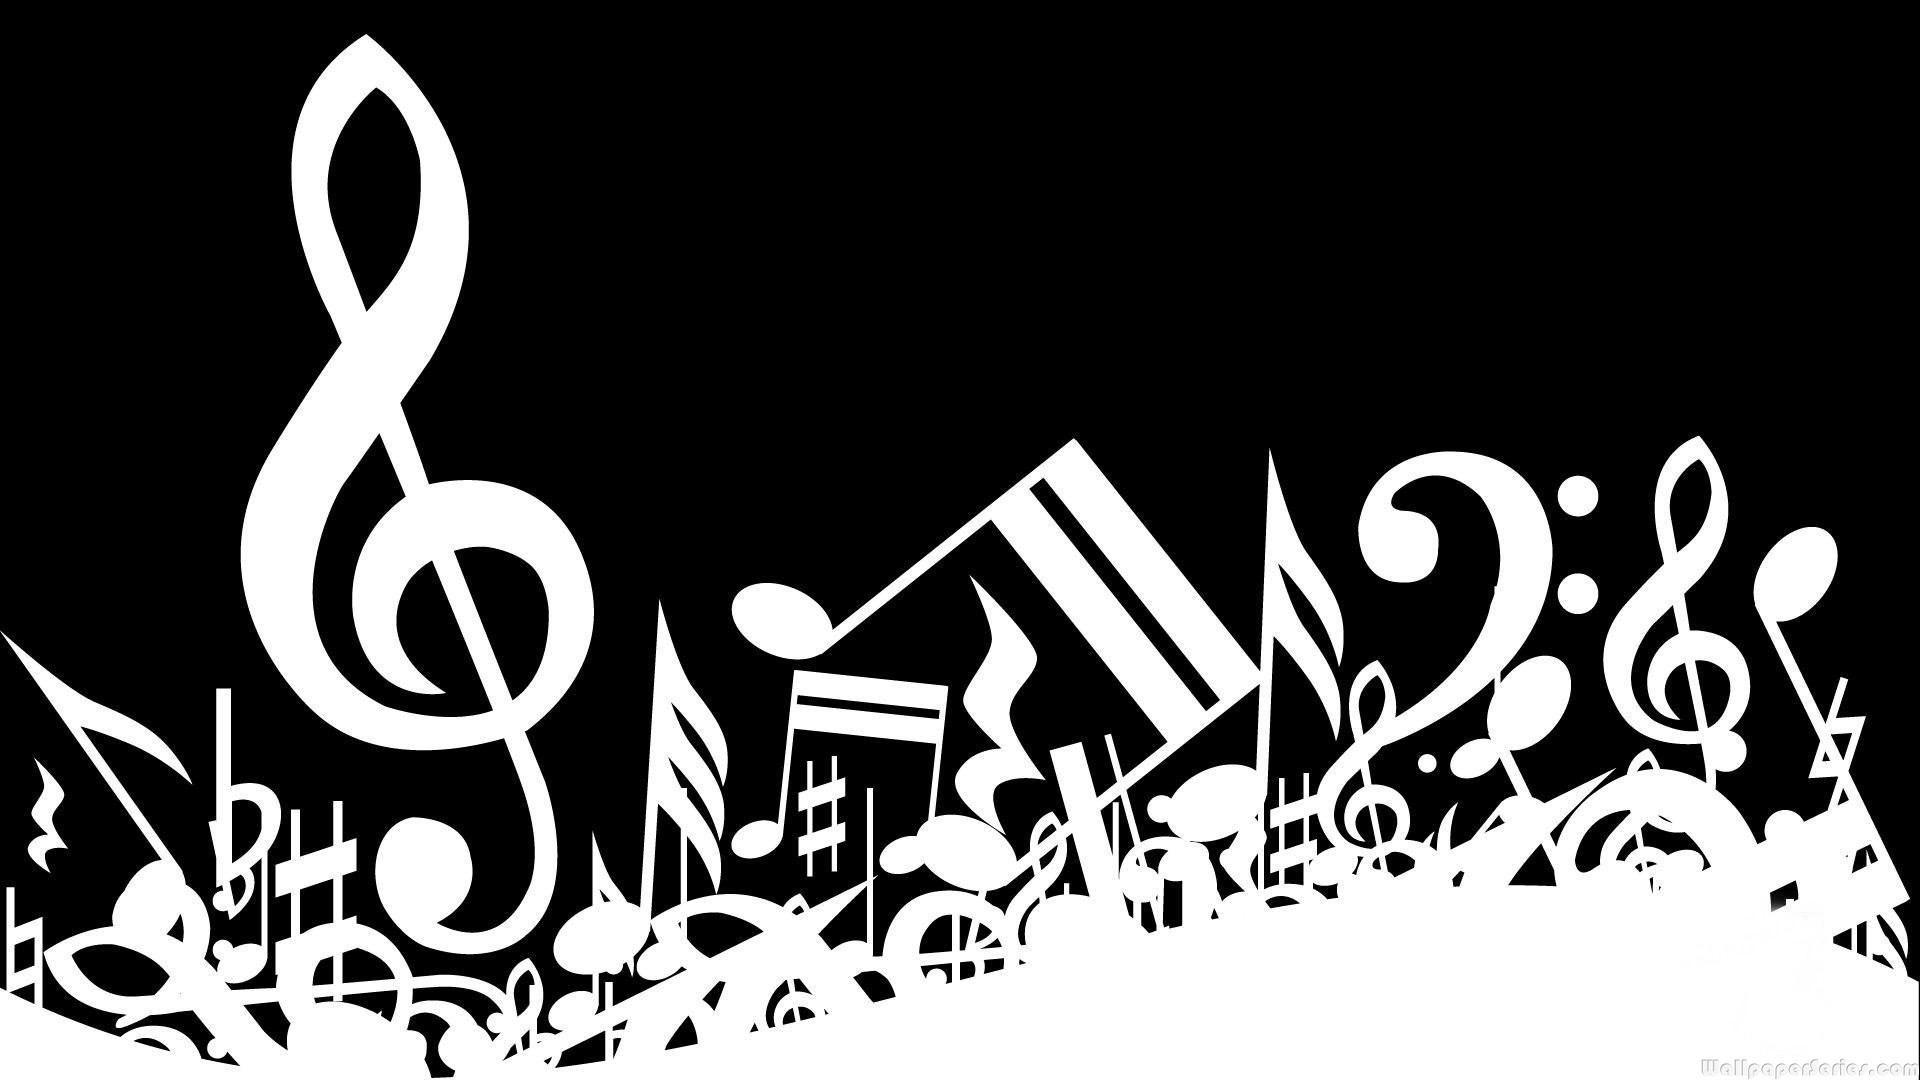 HD Black and White Treble Clef Musical Notes Wallpaper. Download